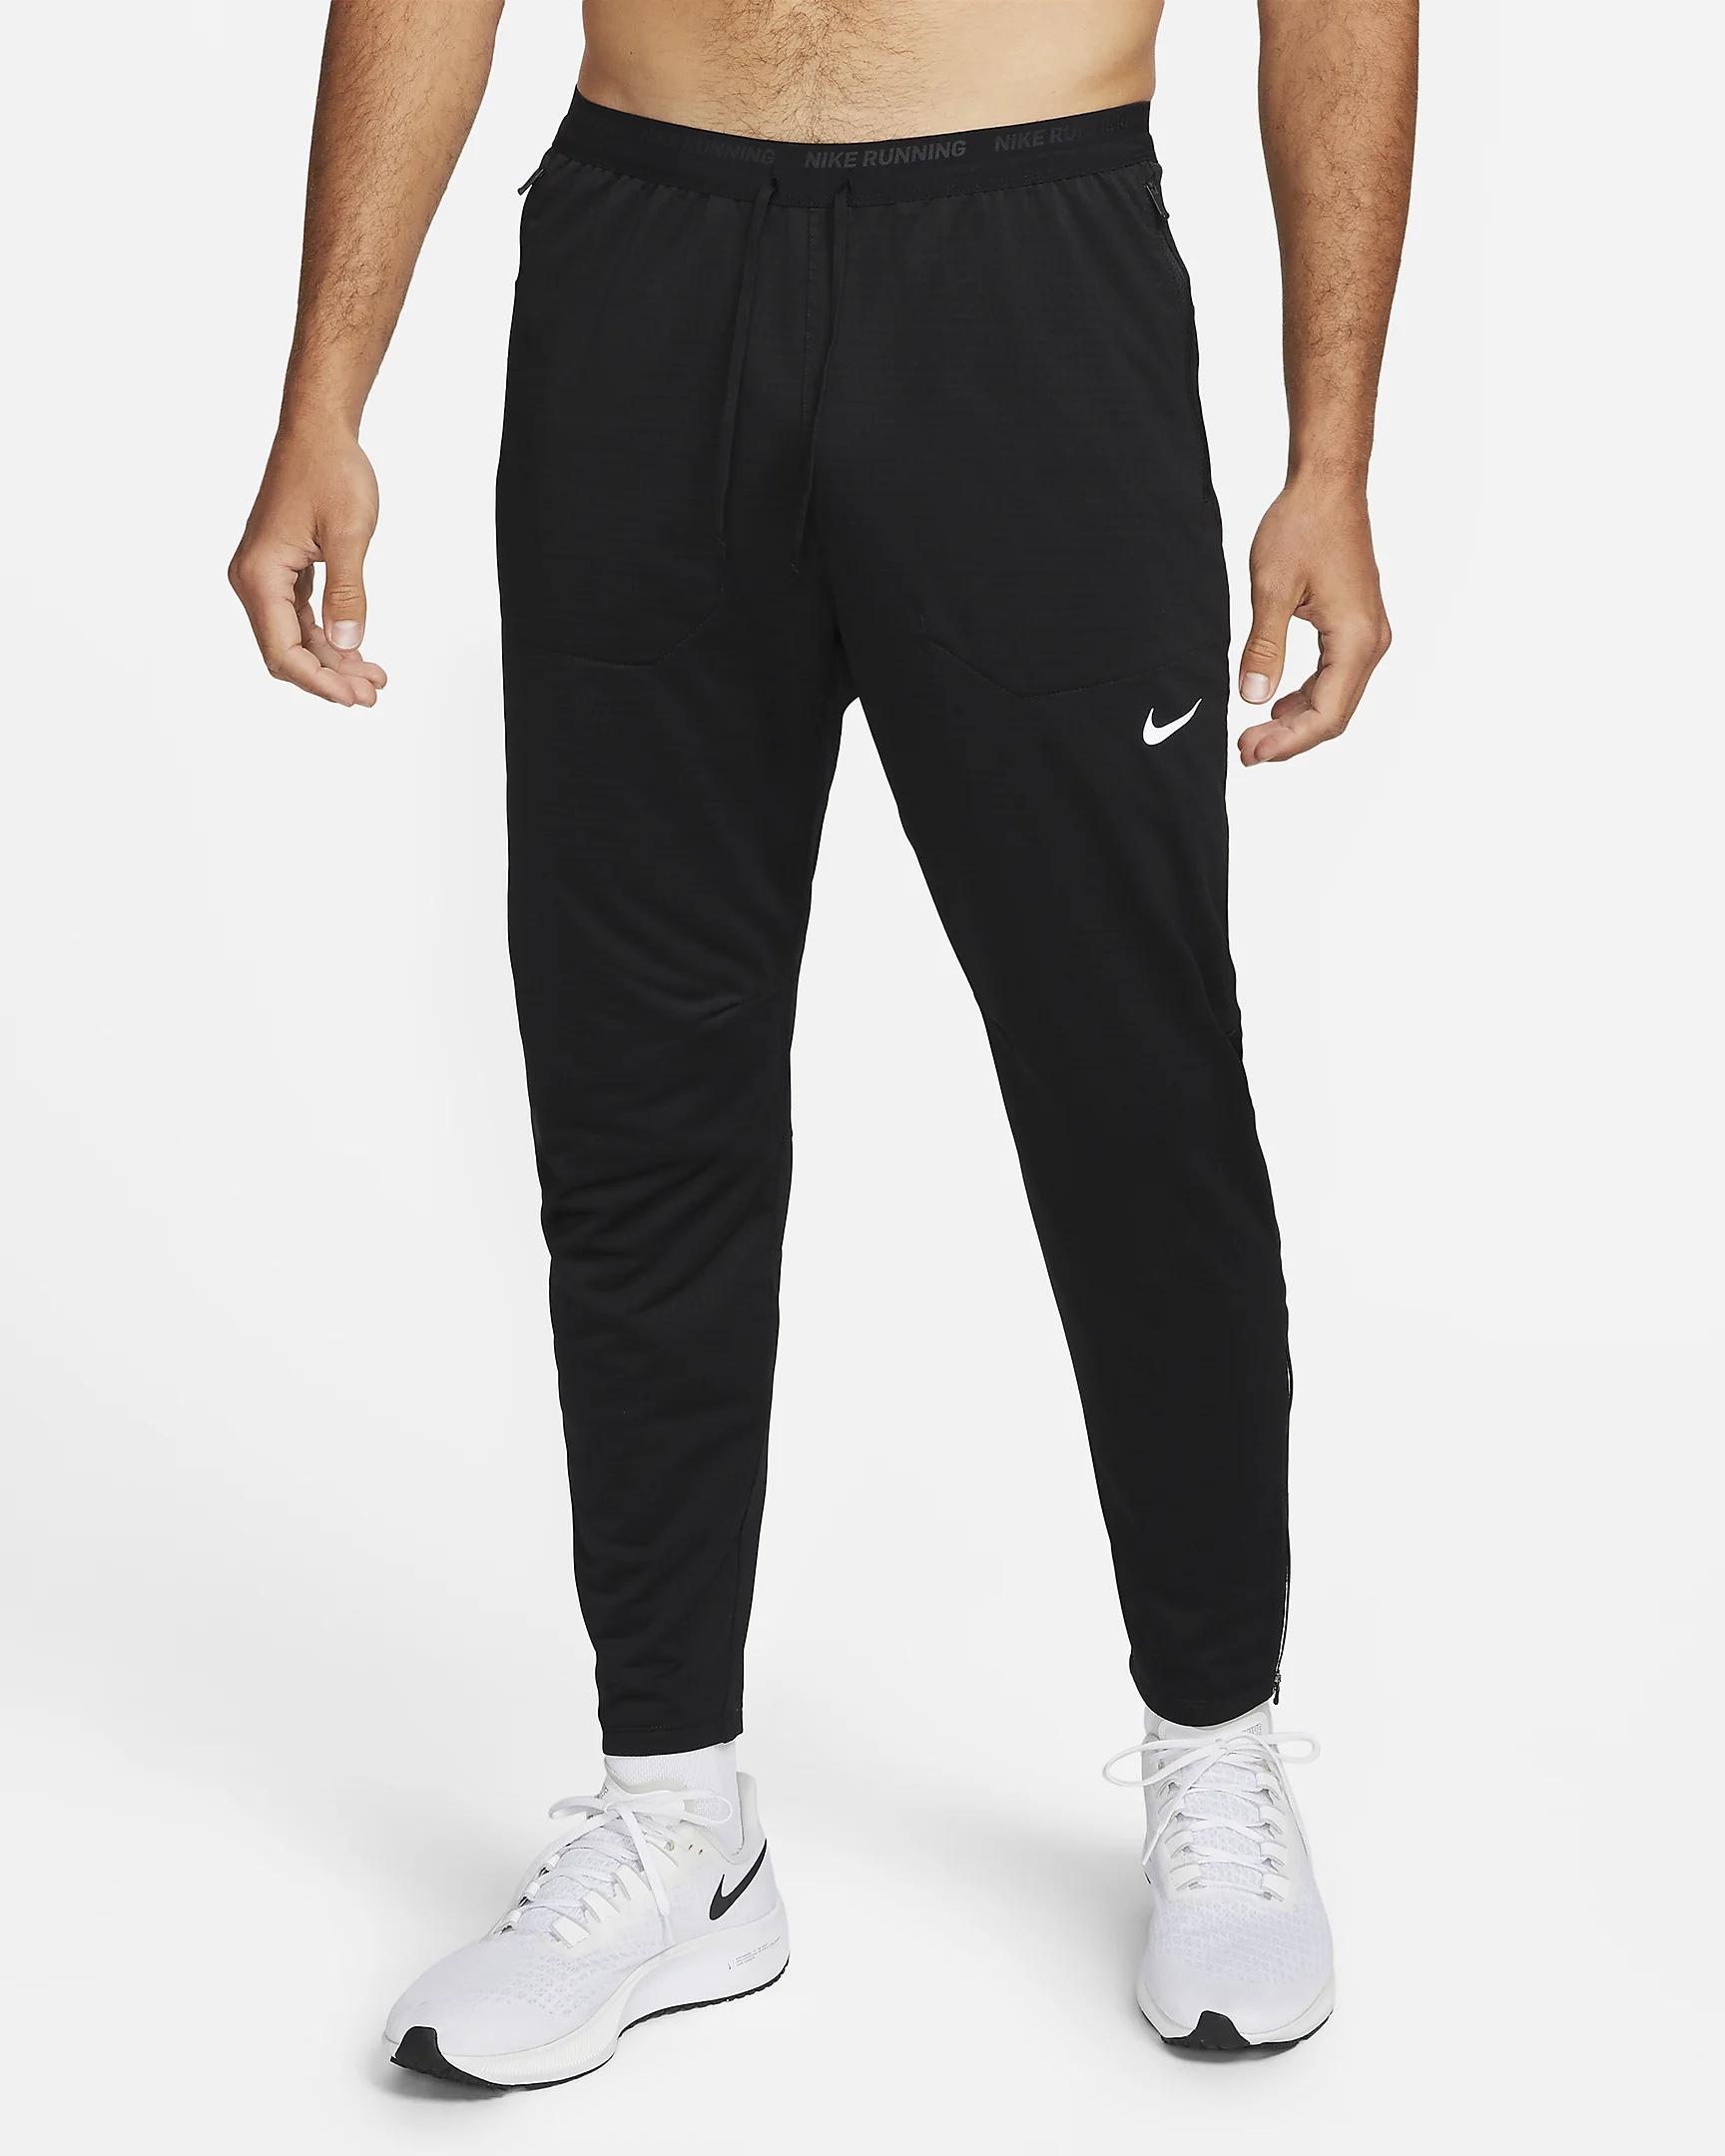 MEN'S PHENOM ELITE KNIT PANT | Performance Running Outfitters